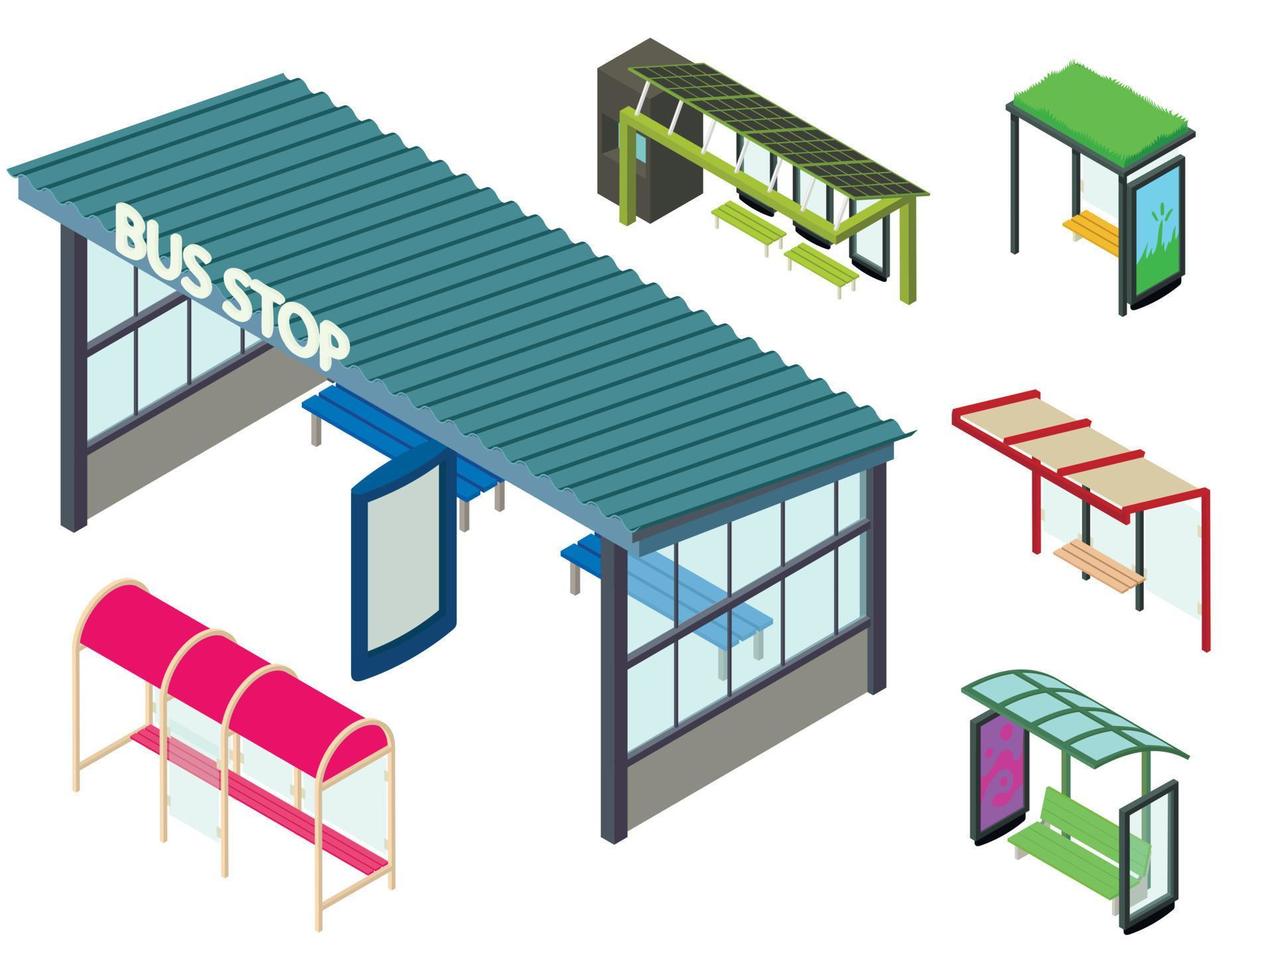 Bus stop icons set, isometric style vector